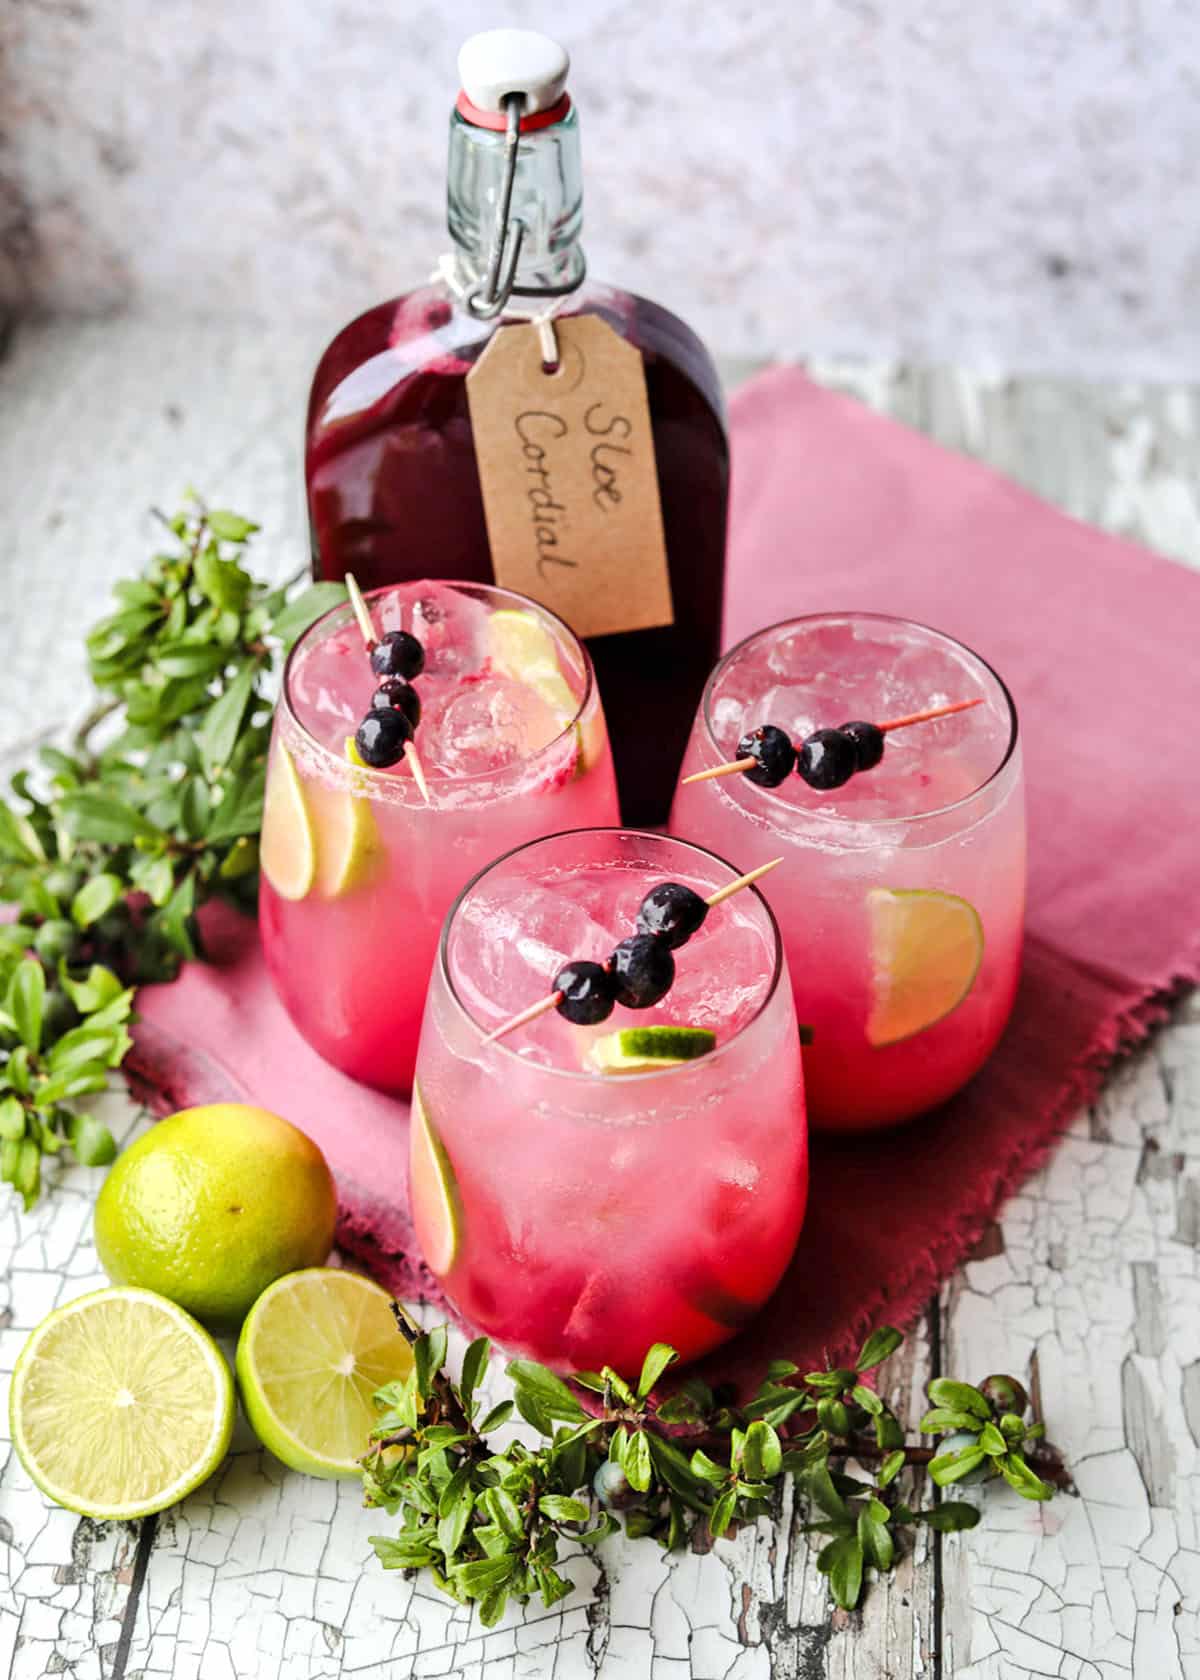 Sloe Cordial with glasses, limes and leaves